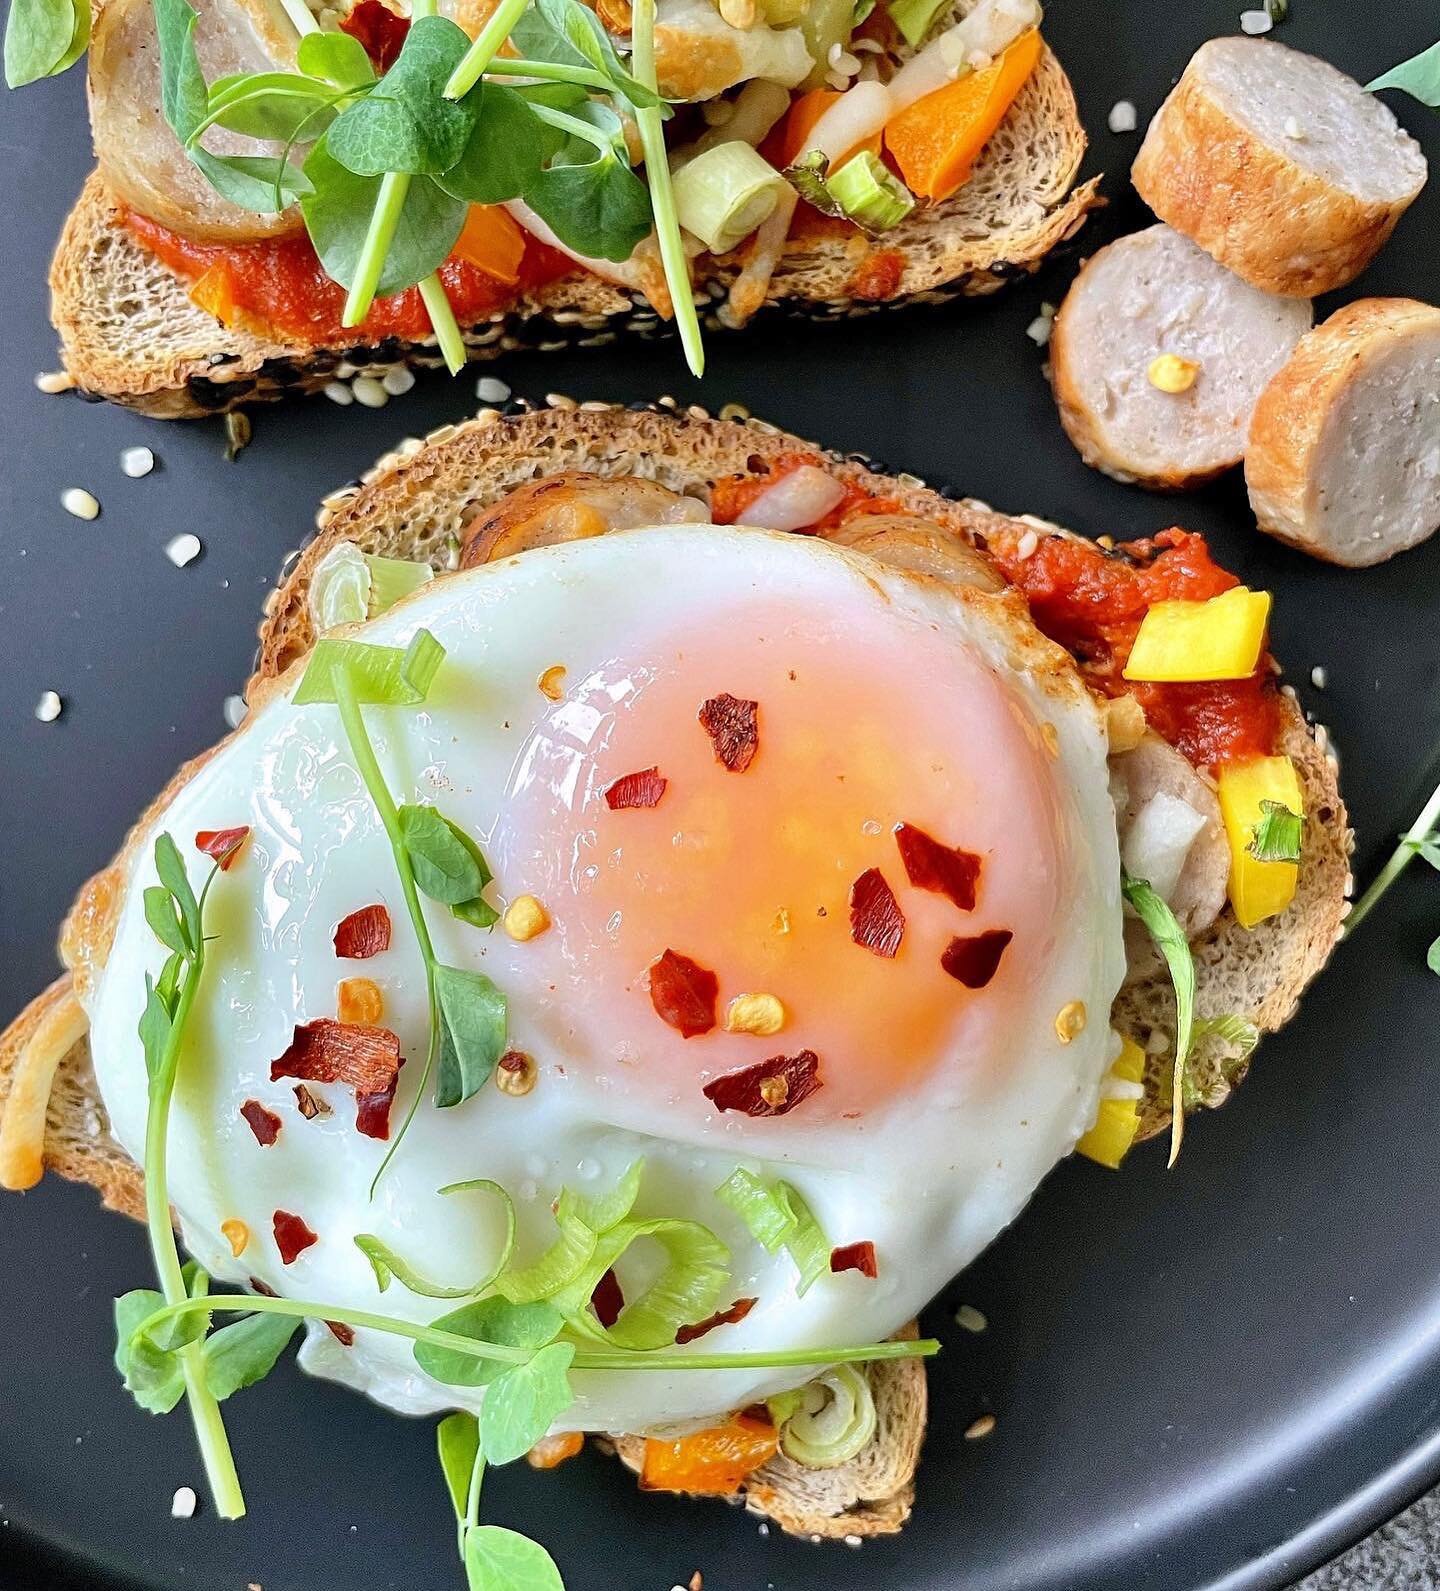 BREAKFAST PIZZA TOAST 
⠀⠀⠀⠀⠀⠀⠀⠀⠀
(df, gf, paleo &amp; keto options)
⠀⠀⠀⠀⠀⠀⠀⠀⠀
Nothing like a little #yolkporn to kick off the long weekend.  This breakfast sausage &amp; egg pizza toast hit the spot and then some. 
⠀⠀⠀⠀⠀⠀⠀⠀⠀
On my plate:
⠀⠀⠀⠀⠀⠀⠀⠀⠀
To